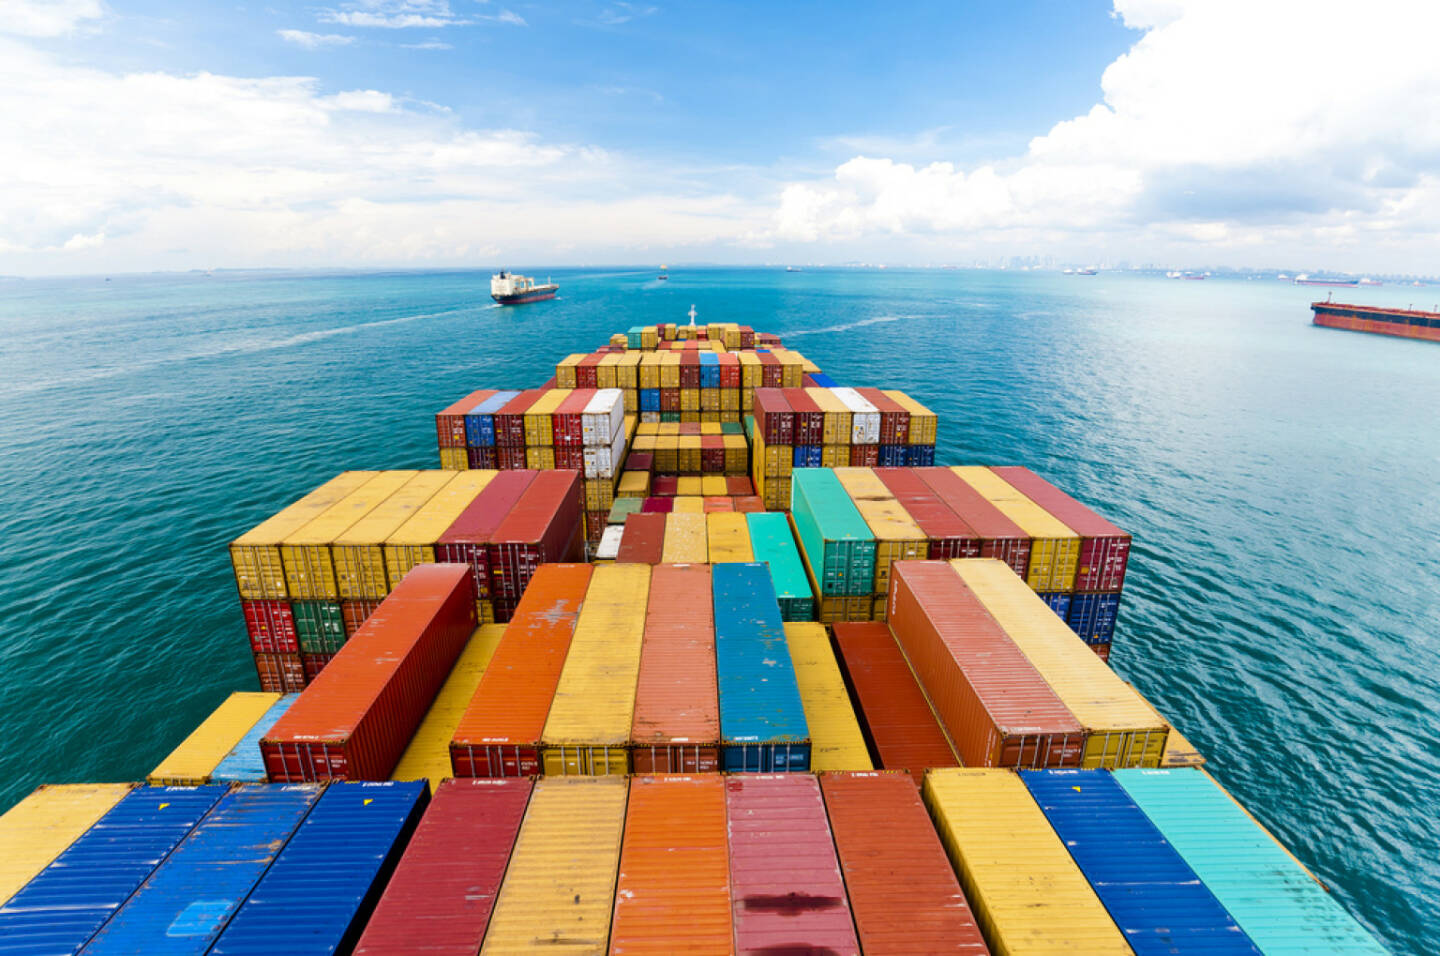 Containerschiff, Container, Transport, Schiff, Cargo, Meer, verschiffen, versenden, Fracht, http://www.shutterstock.com/de/pic-172537049/stock-photo-cargo-ships-entering-one-of-the-busiest-ports-in-the-world-singapore.html